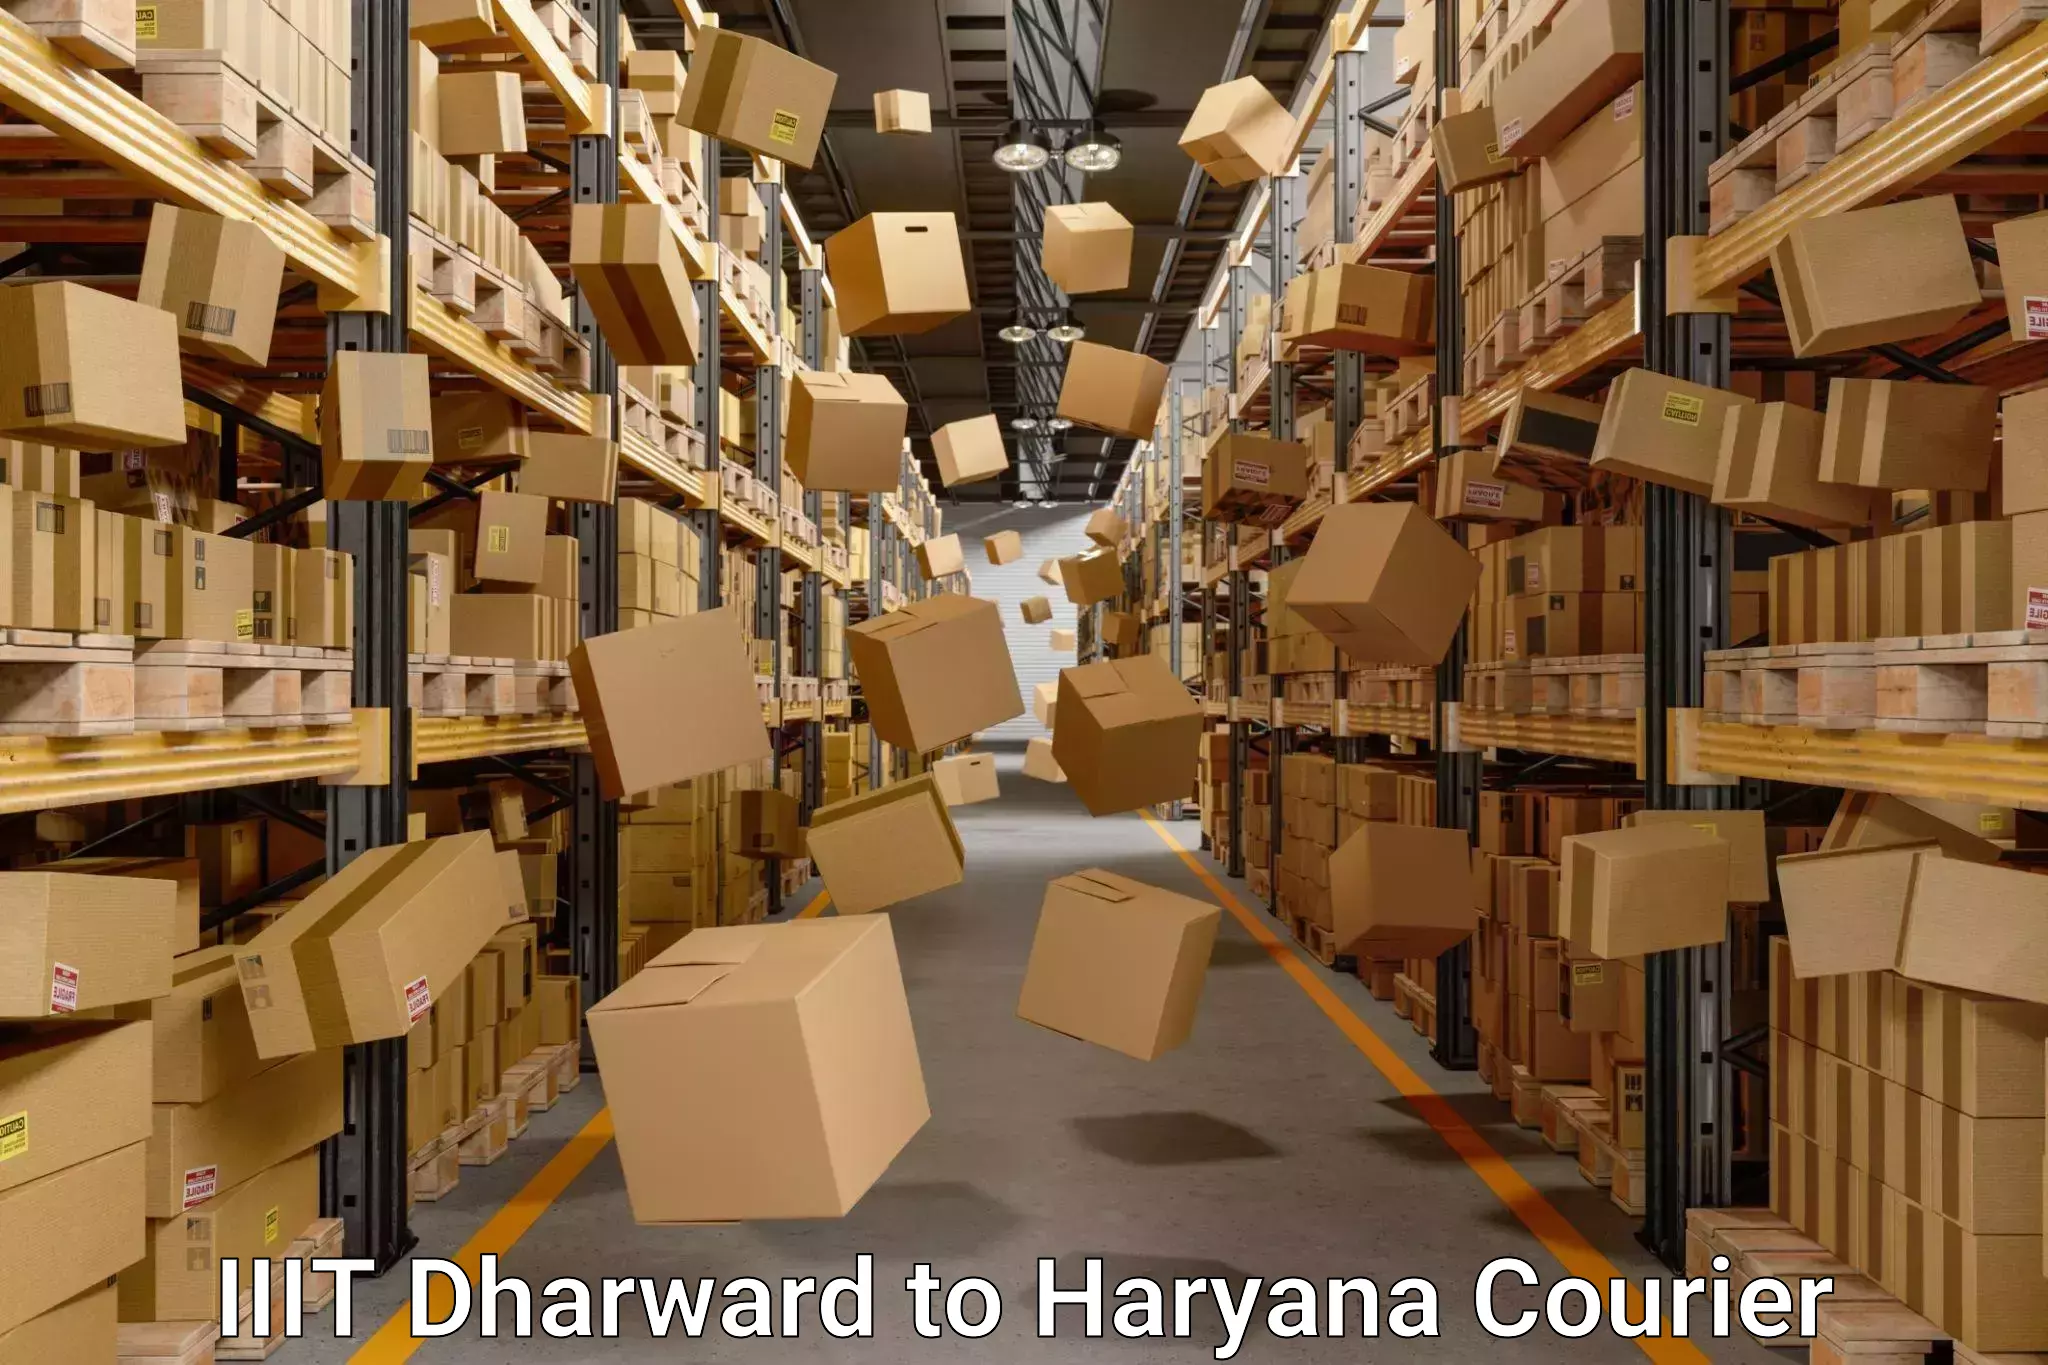 Moving and storage services IIIT Dharward to Haryana